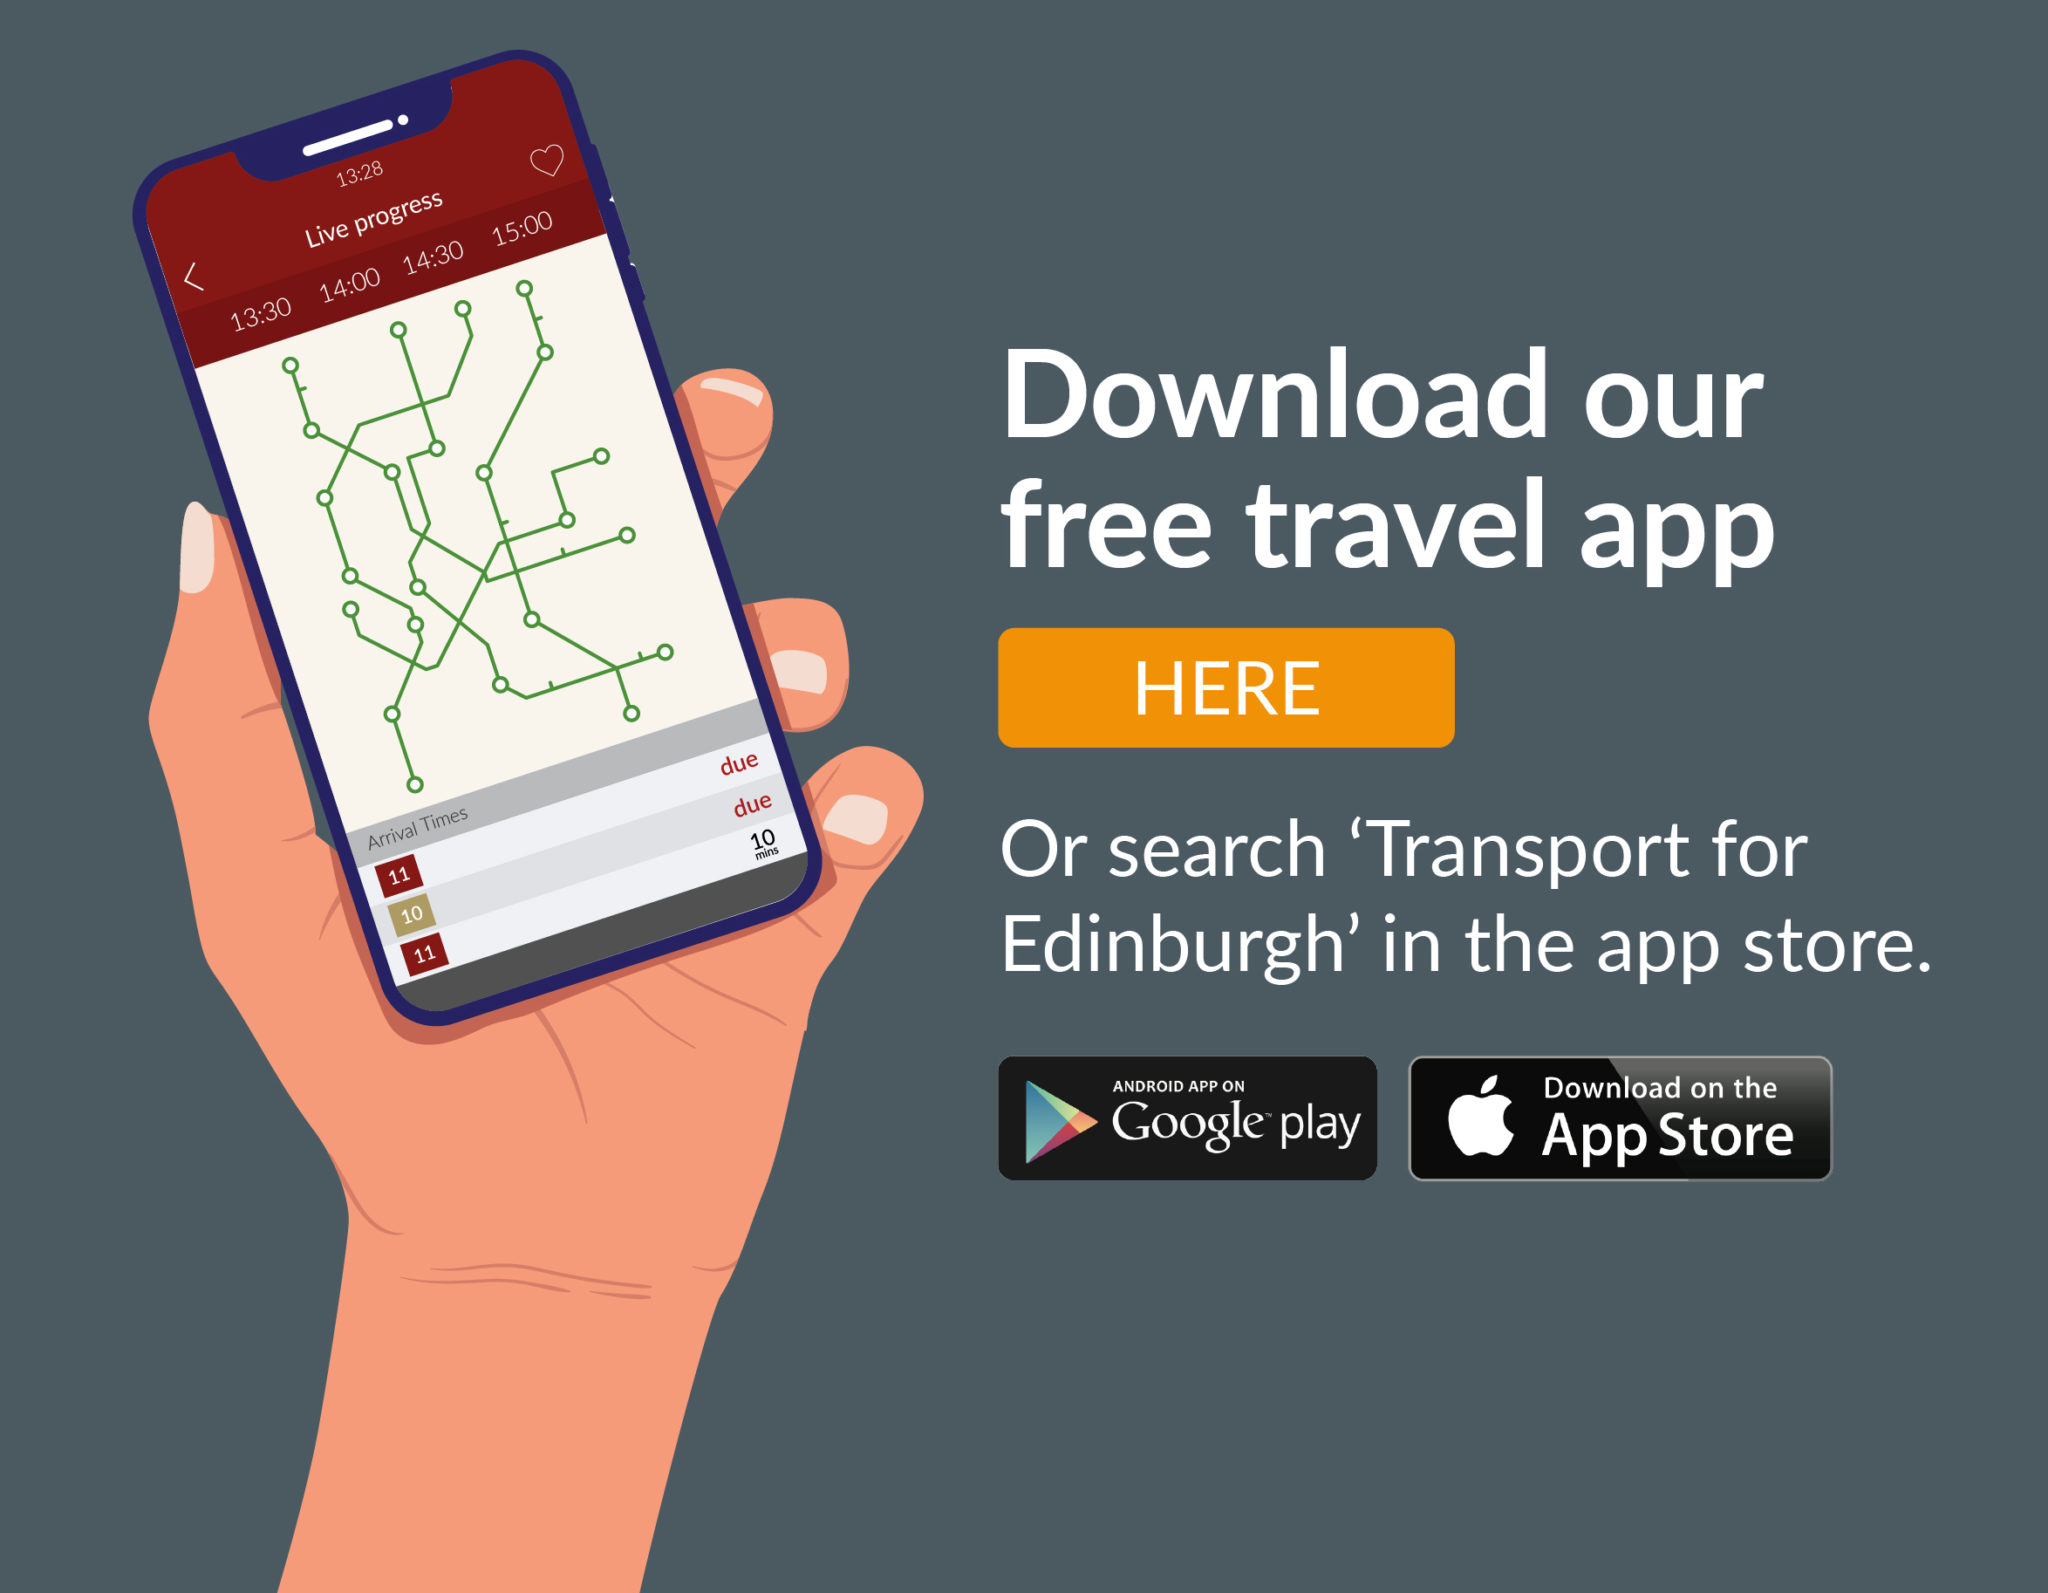 Click here to download our travel app